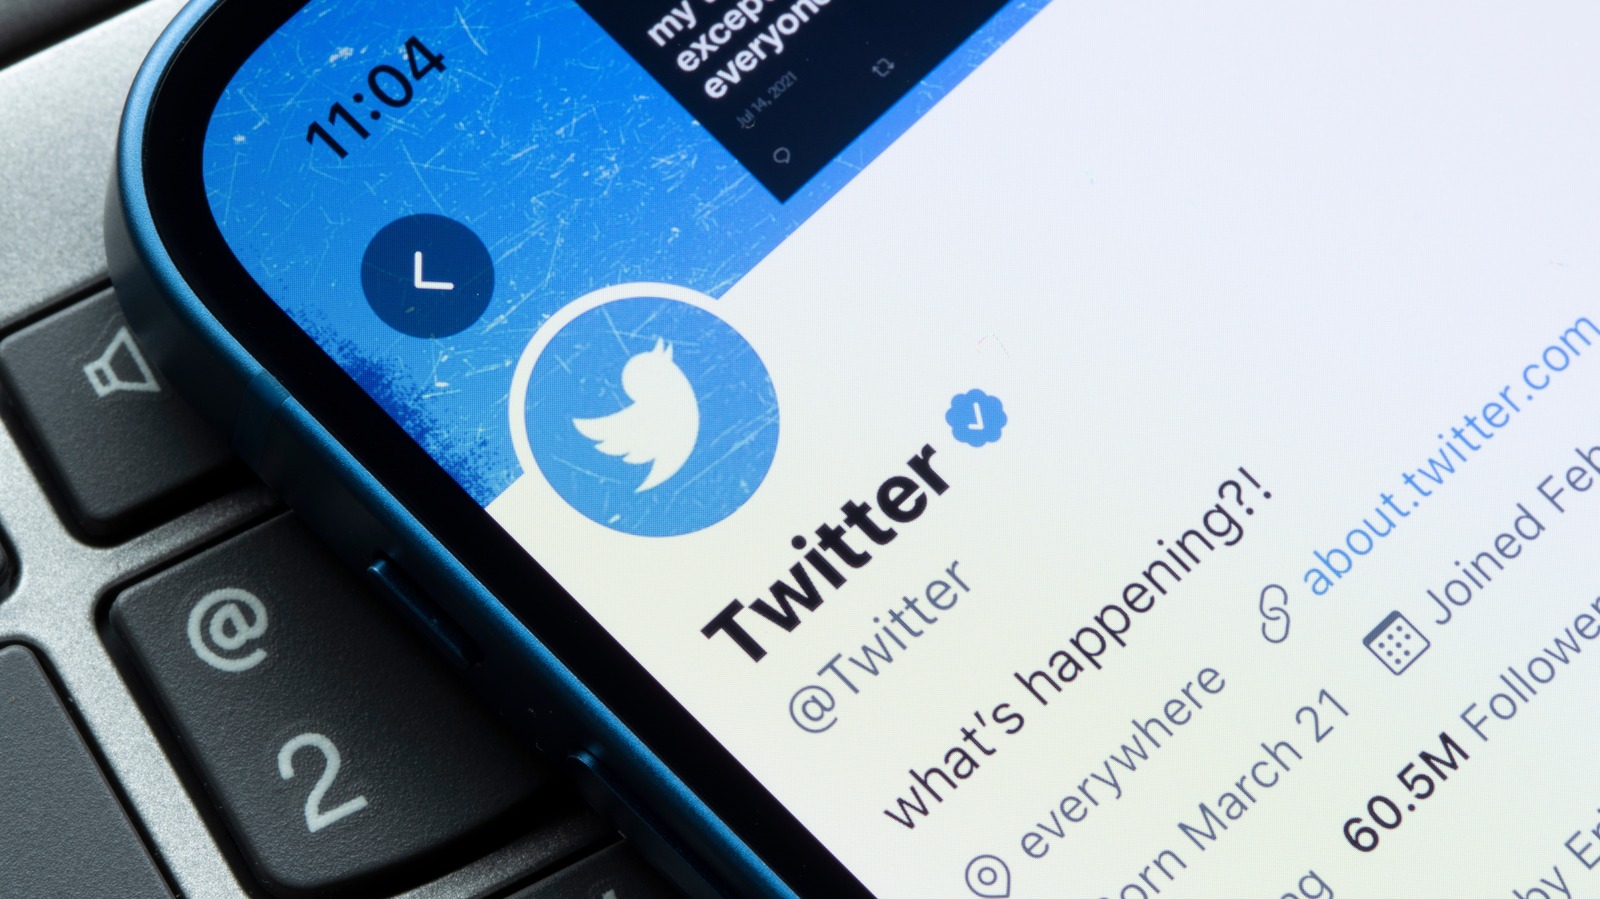 Twitter’s Source Code leaked: legal action taken